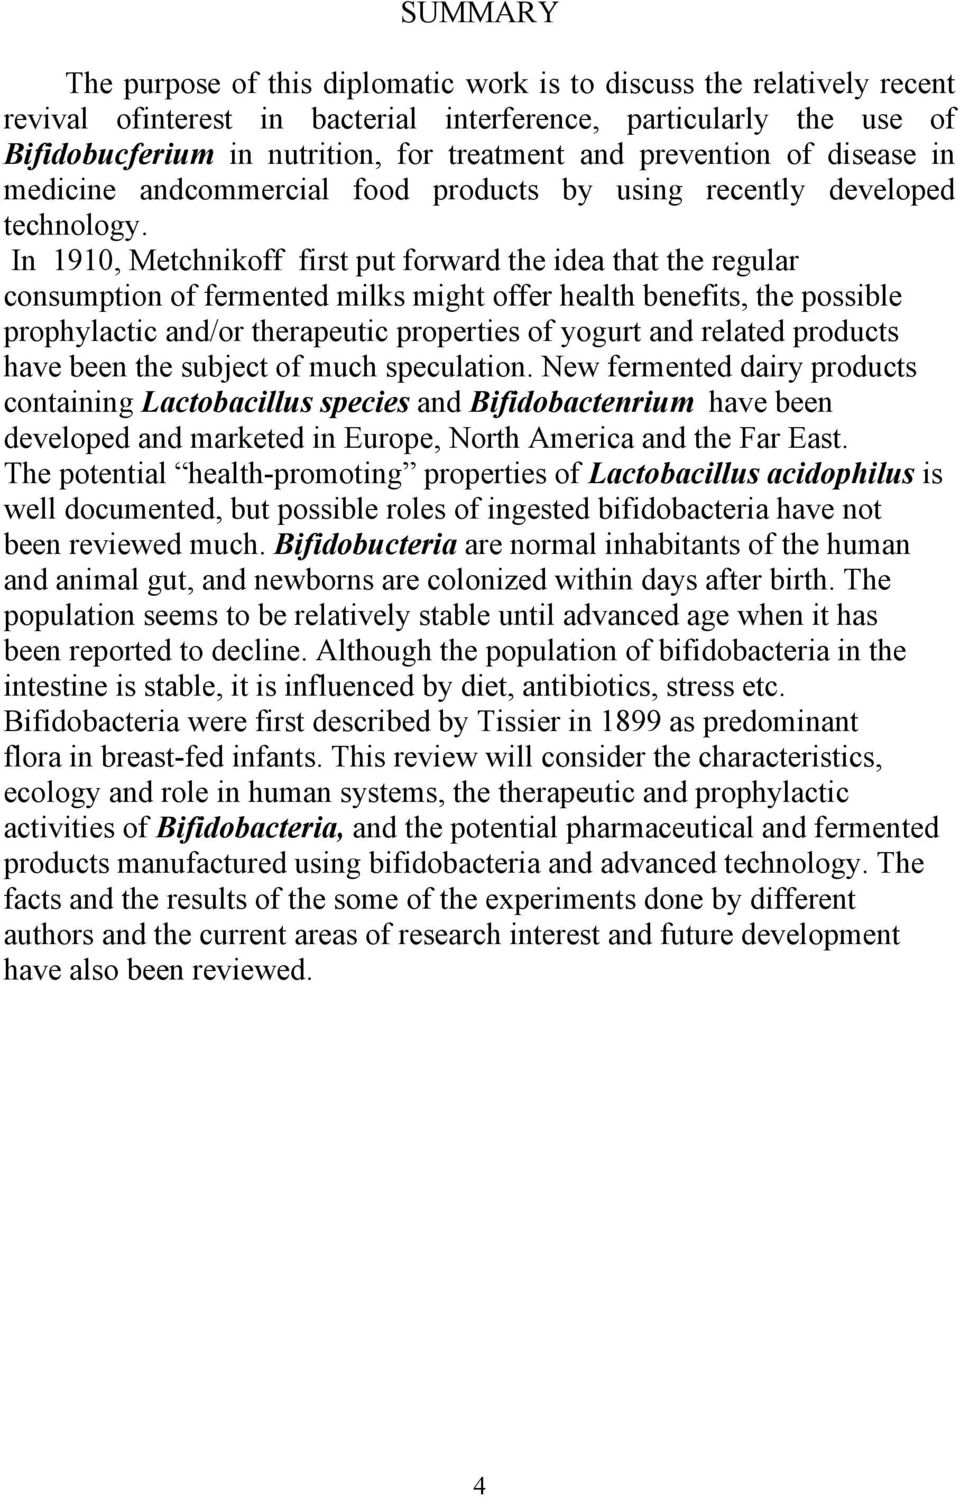 In 1910, Metchnikoff first put forward the idea that the regular consumption of fermented milks might offer health benefits, the possible prophylactic and/or therapeutic properties of yogurt and